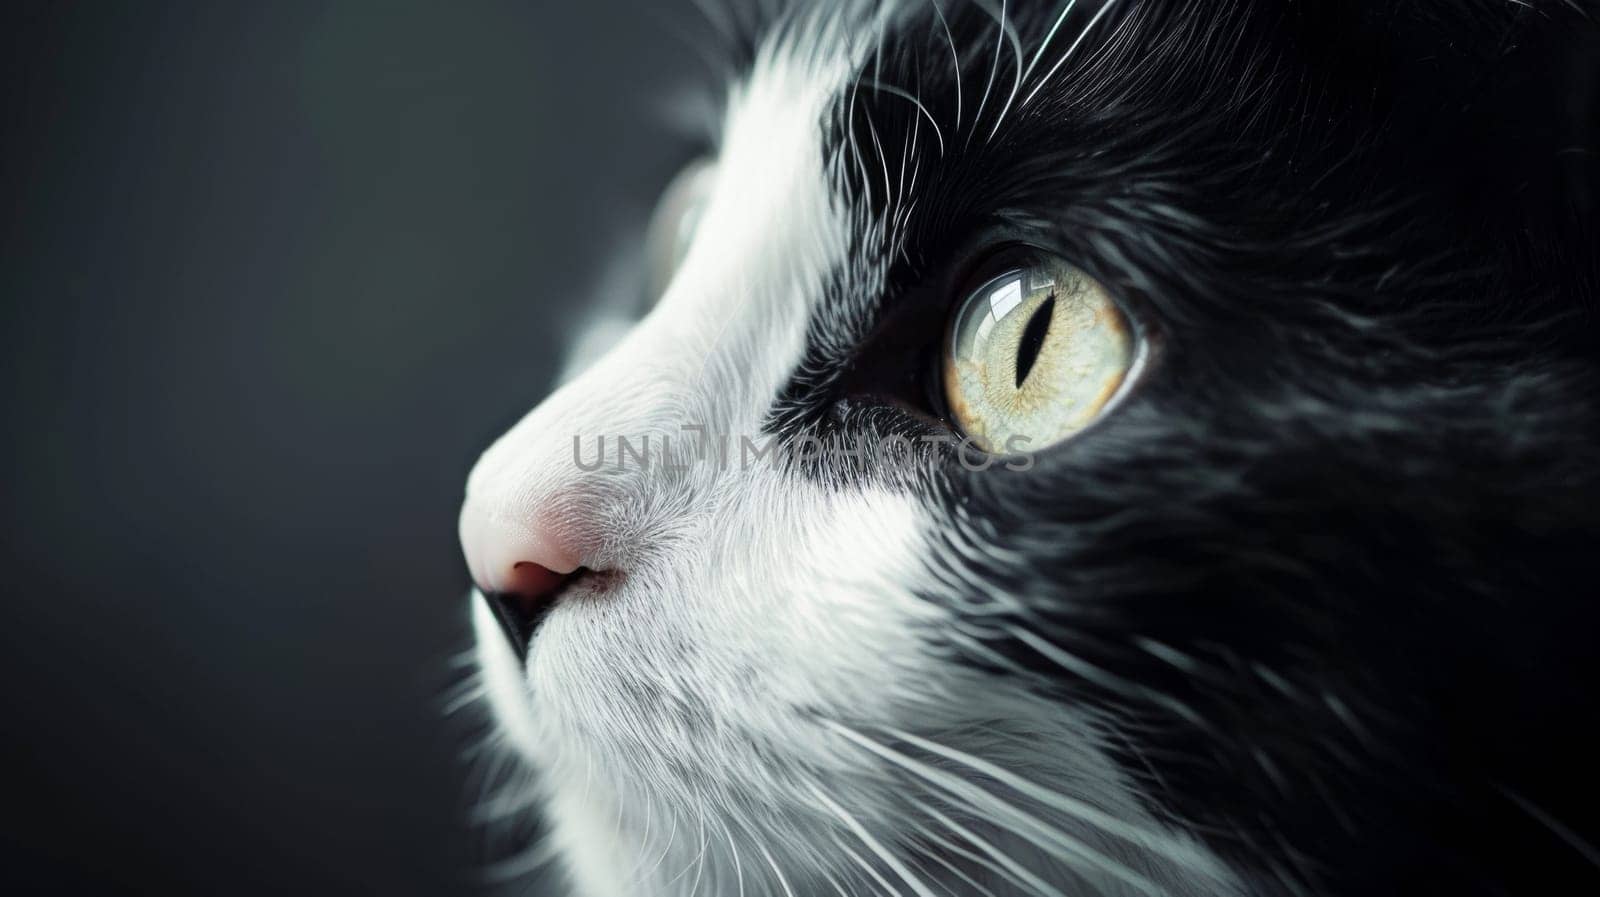 A close up of a black and white cat staring at something